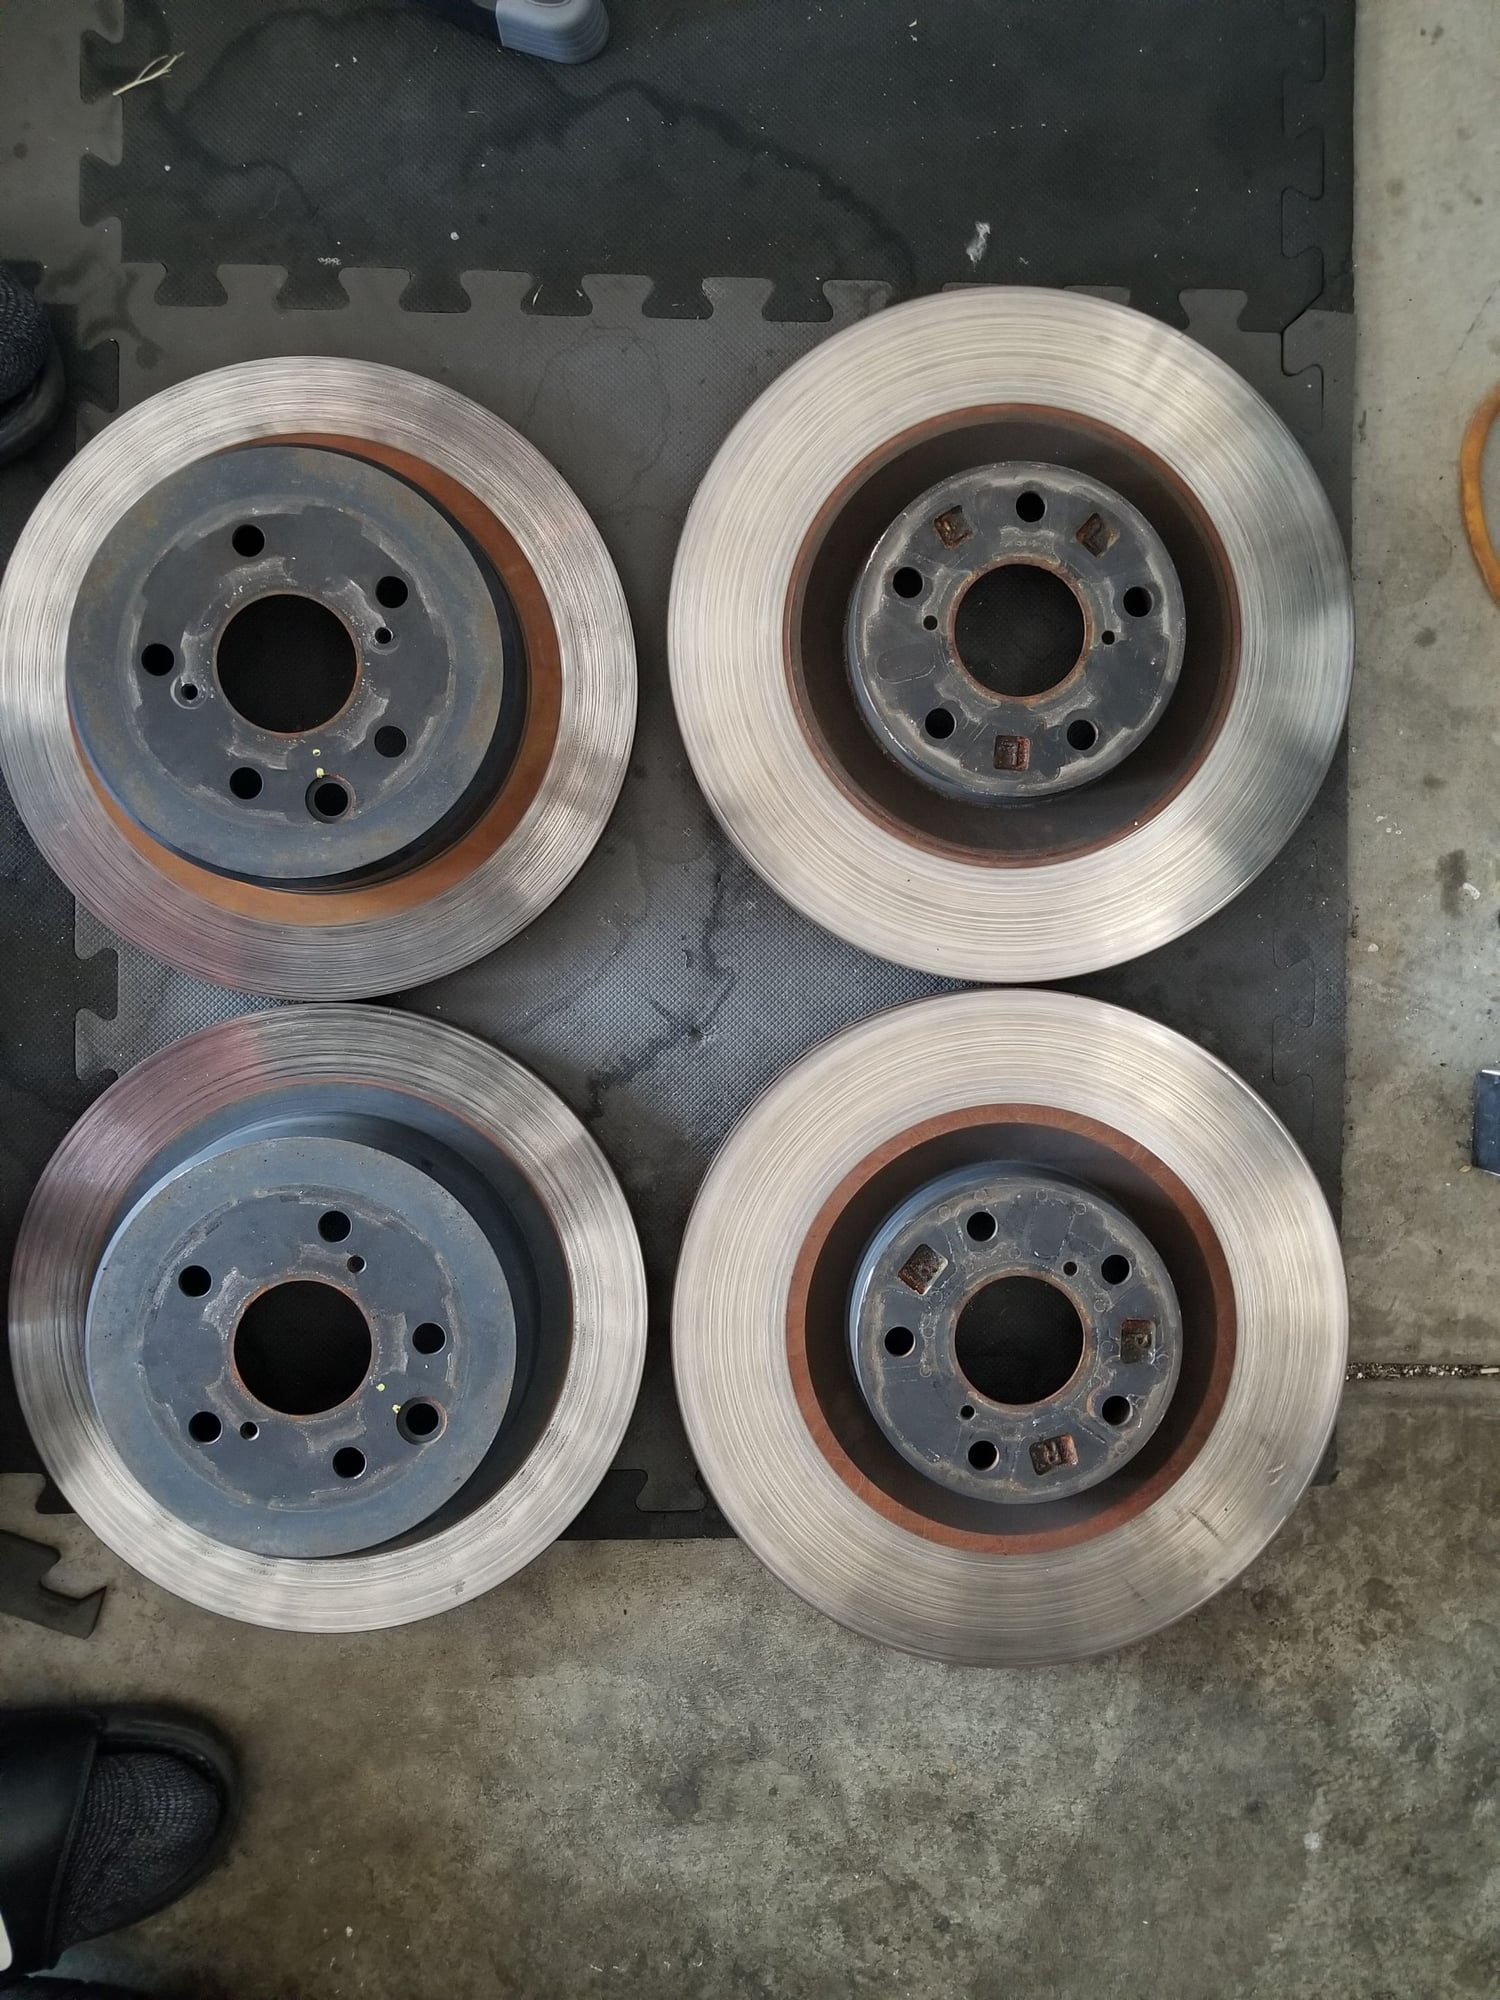 Brakes - Stock GS200t Rotors Set - Used - 2016 to 2017 Lexus GS200t - Moreno Valley, CA 92551, United States